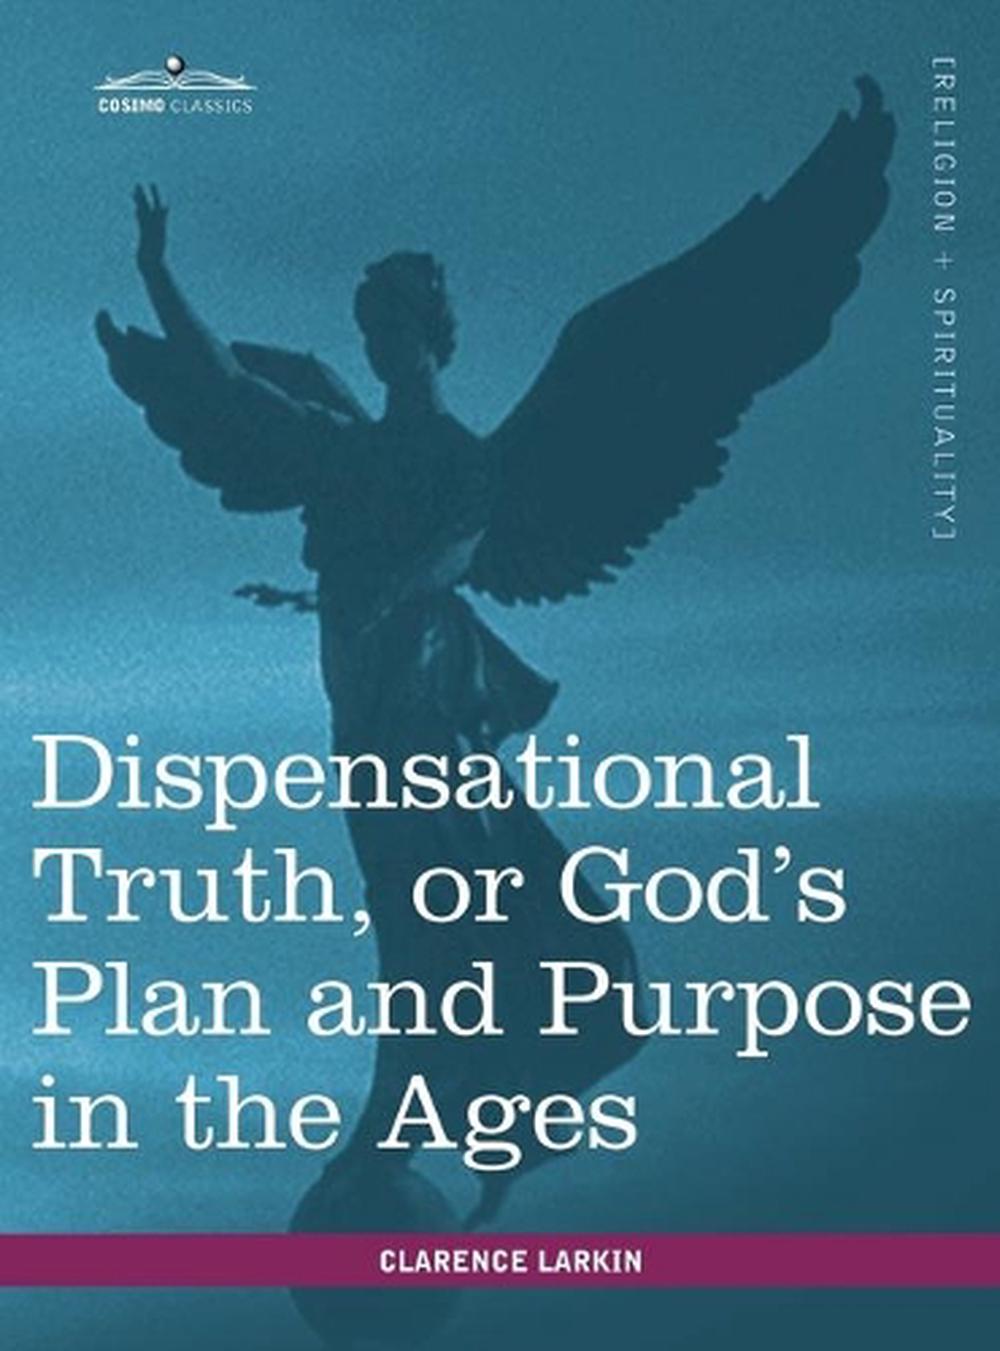 Dispensational Truth Or God S Plan And Purpose In The Ages By Clarence